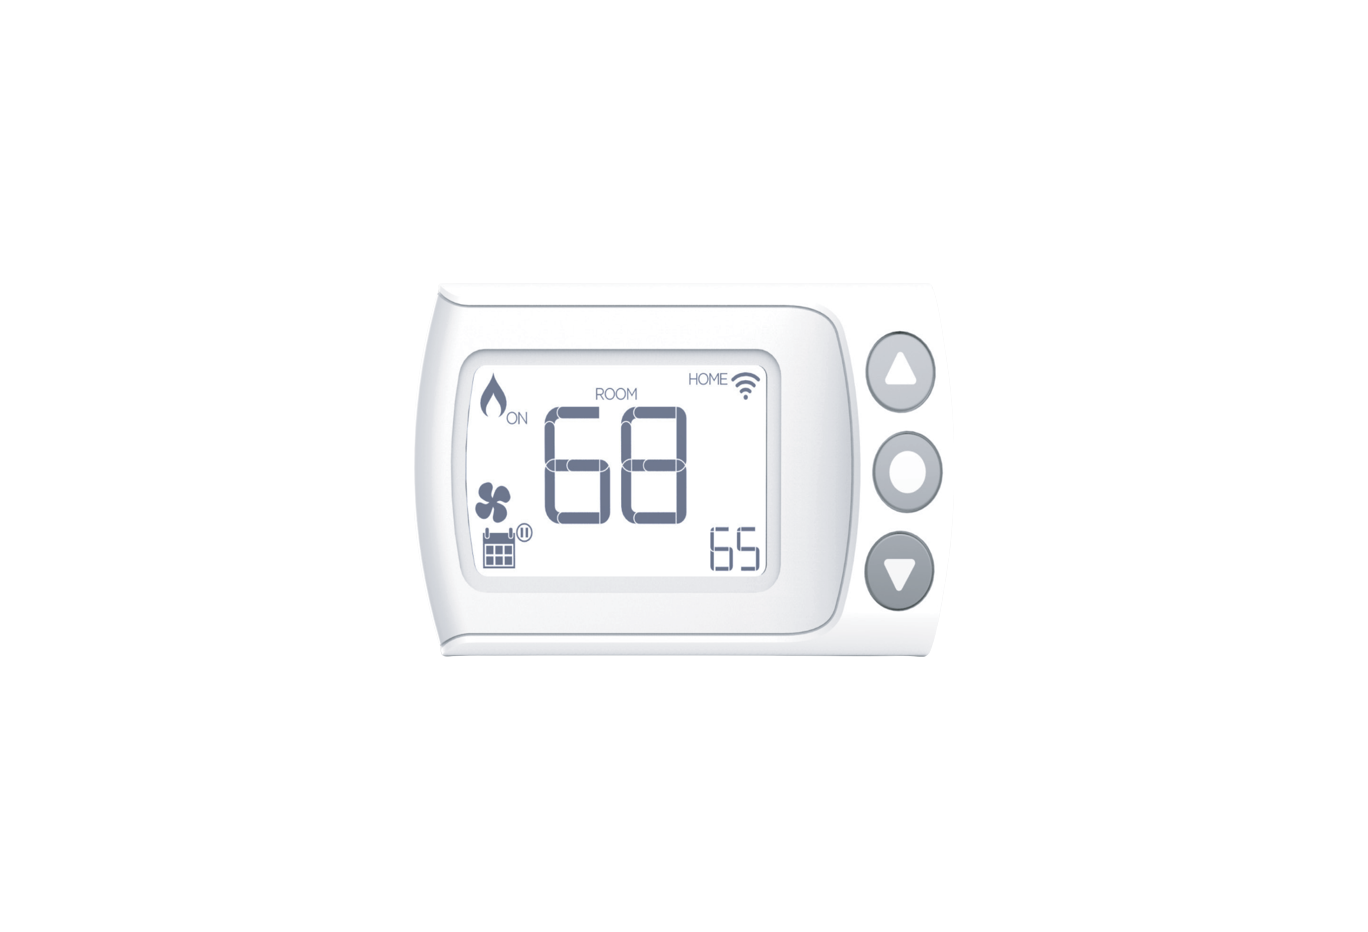 GREENLITE Airz Wi-Fi Enabled Smart Thermostat Product Specifications Guide